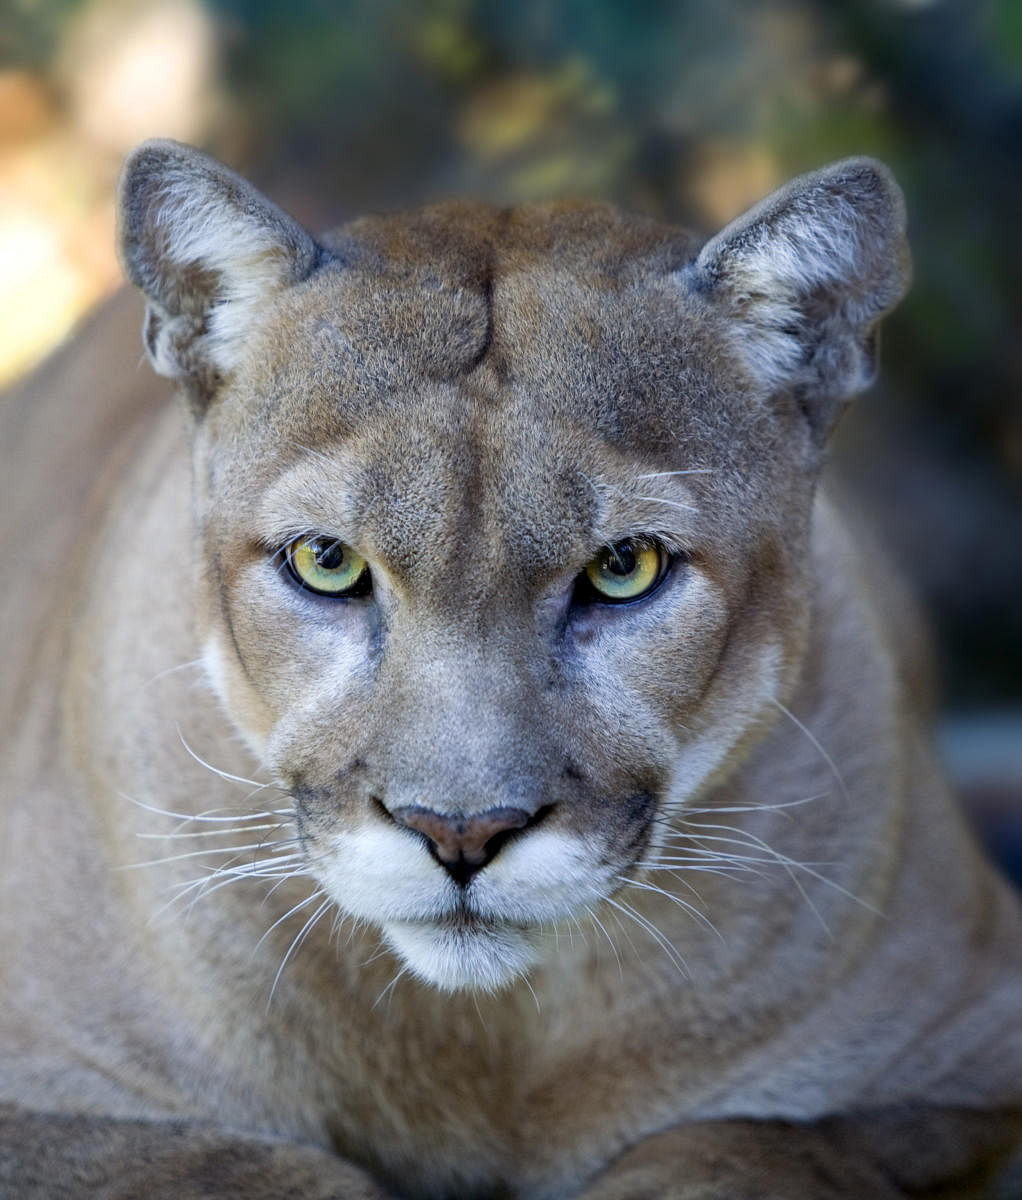 Large carnivores such as the jaguar, puma, Eurasian lynx, striped hyena, grey wolf and cheetah are at risk of extinction. PHOTO CREDIT: UNITED STATES FISH AND WILDLIFE SERVICE &amp; ERIC KILBY/NYT